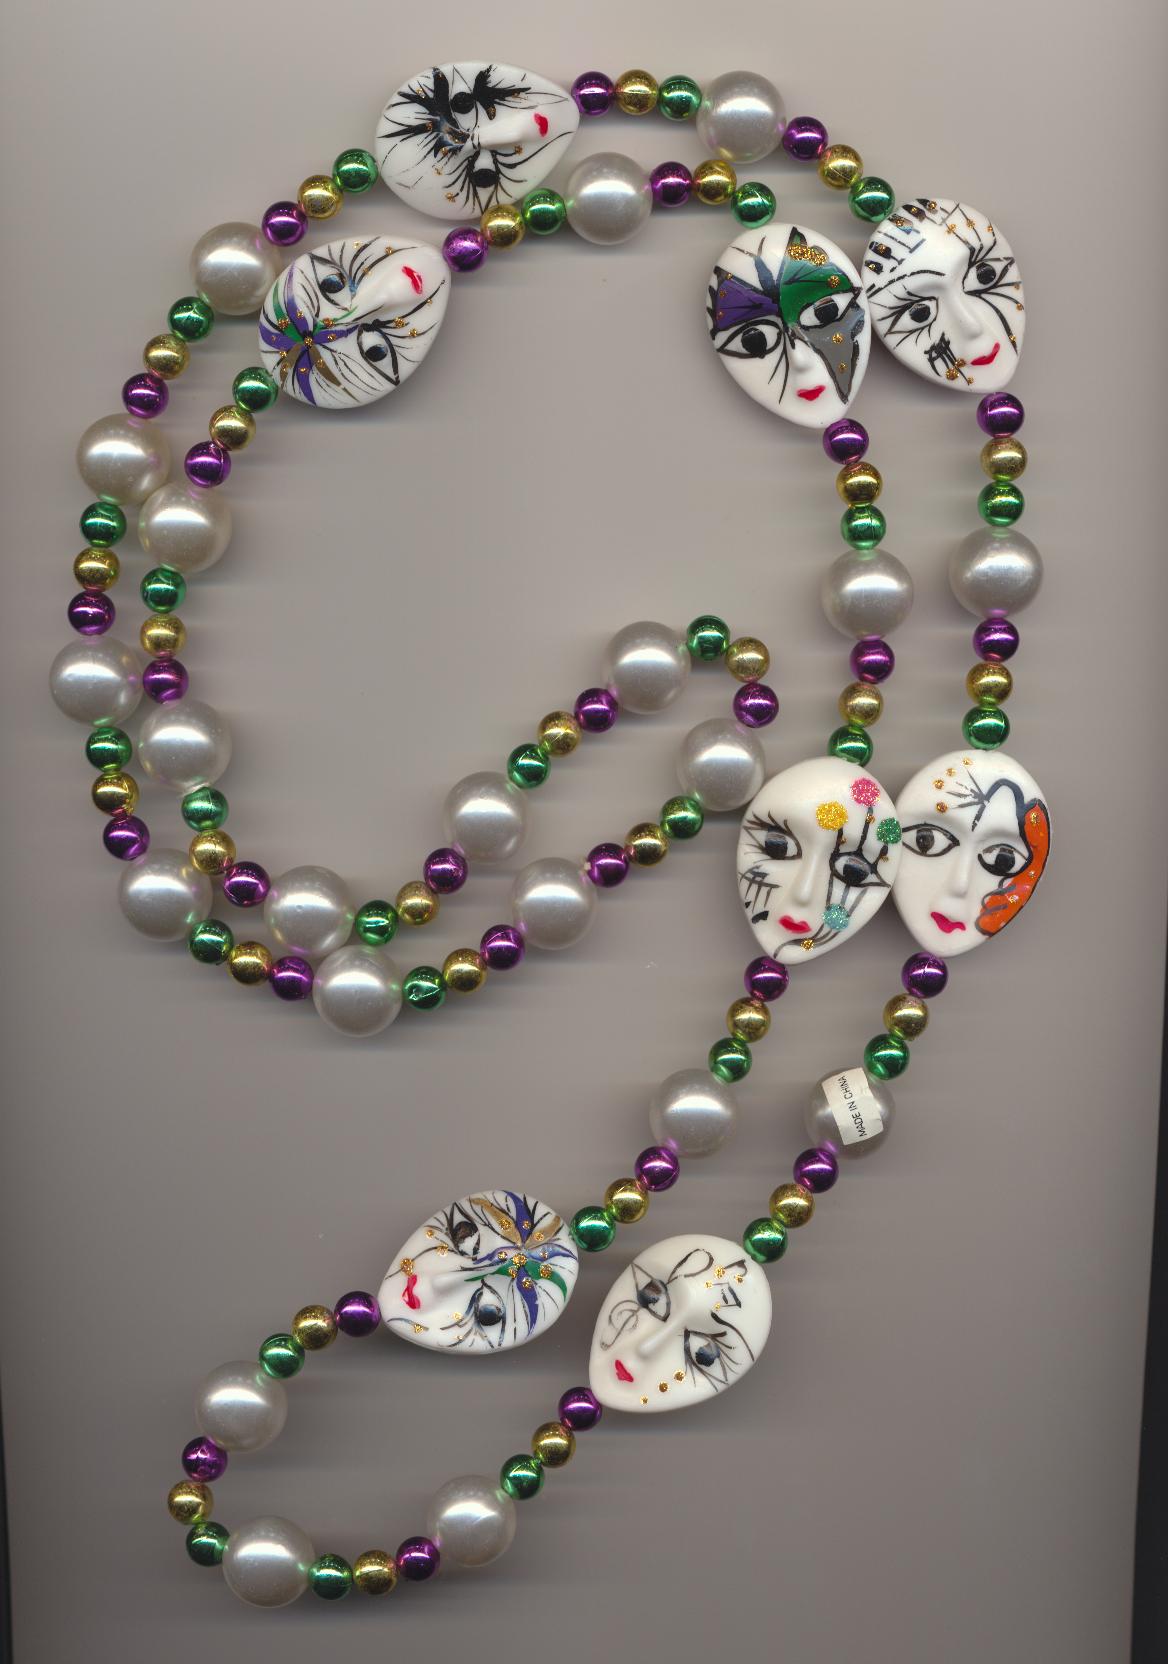 Hand painted lady face beads necklace made of plastic beads, Mardi Gras Parade 1996, New Orleans, made in China, length 50'' 126cm.